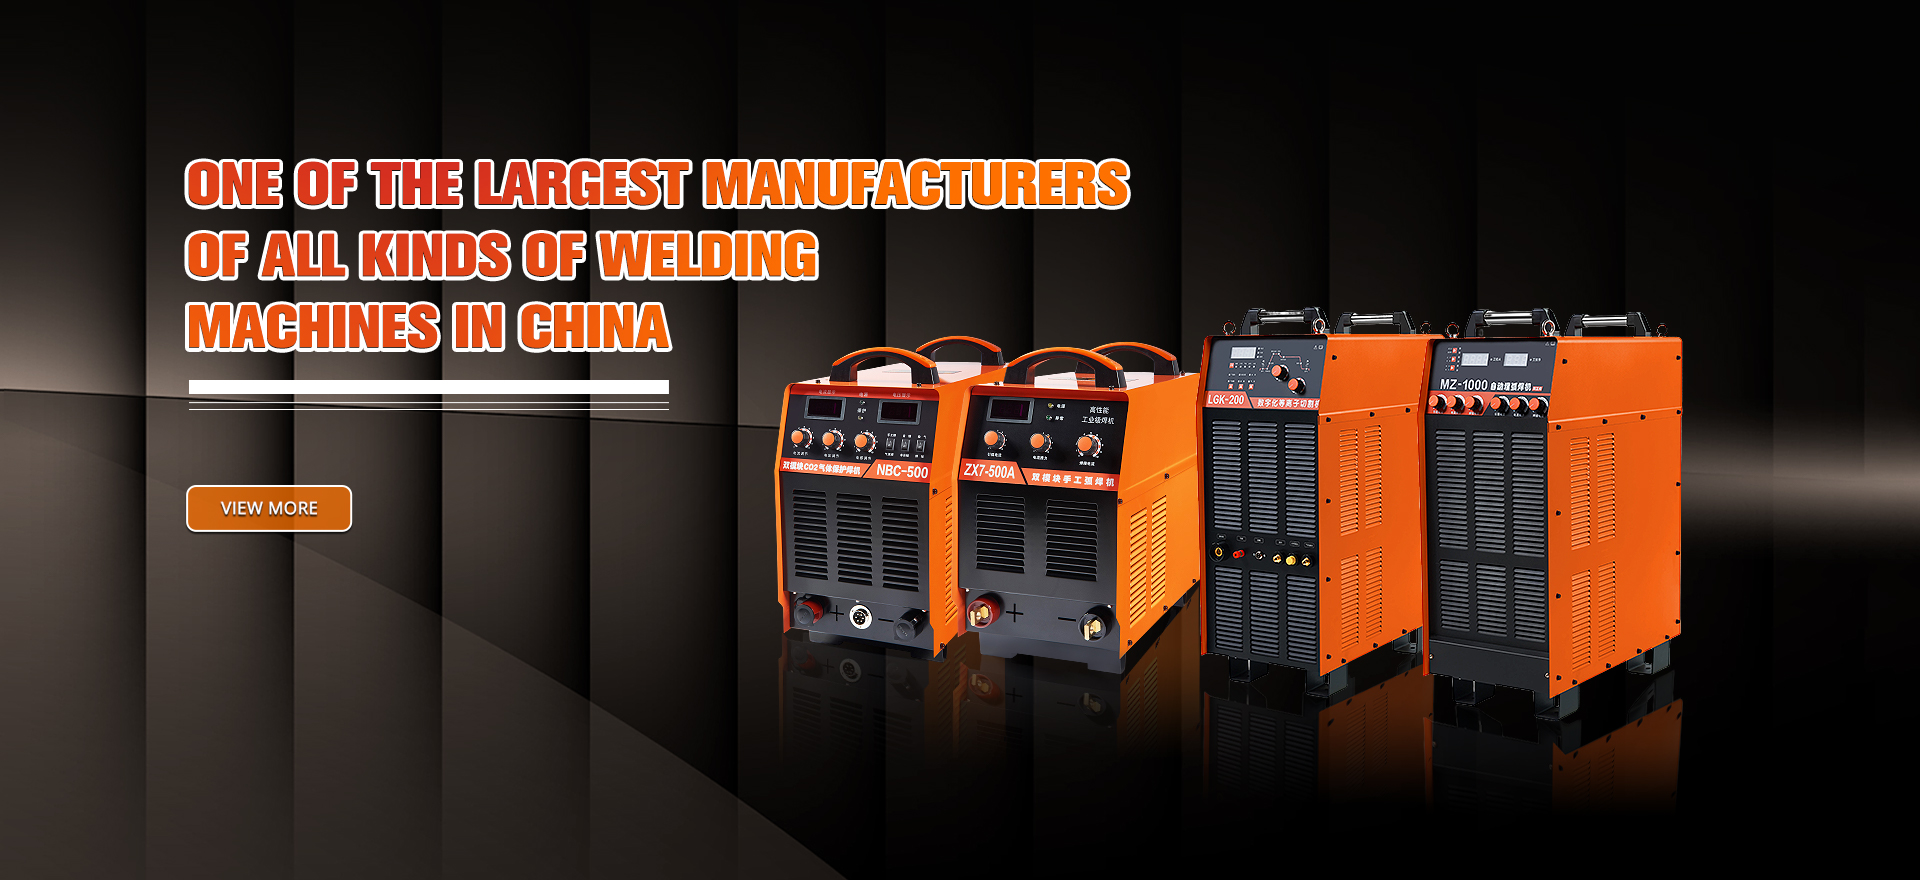 ALL KINDS OF WELDING MACHINES IN CHINA